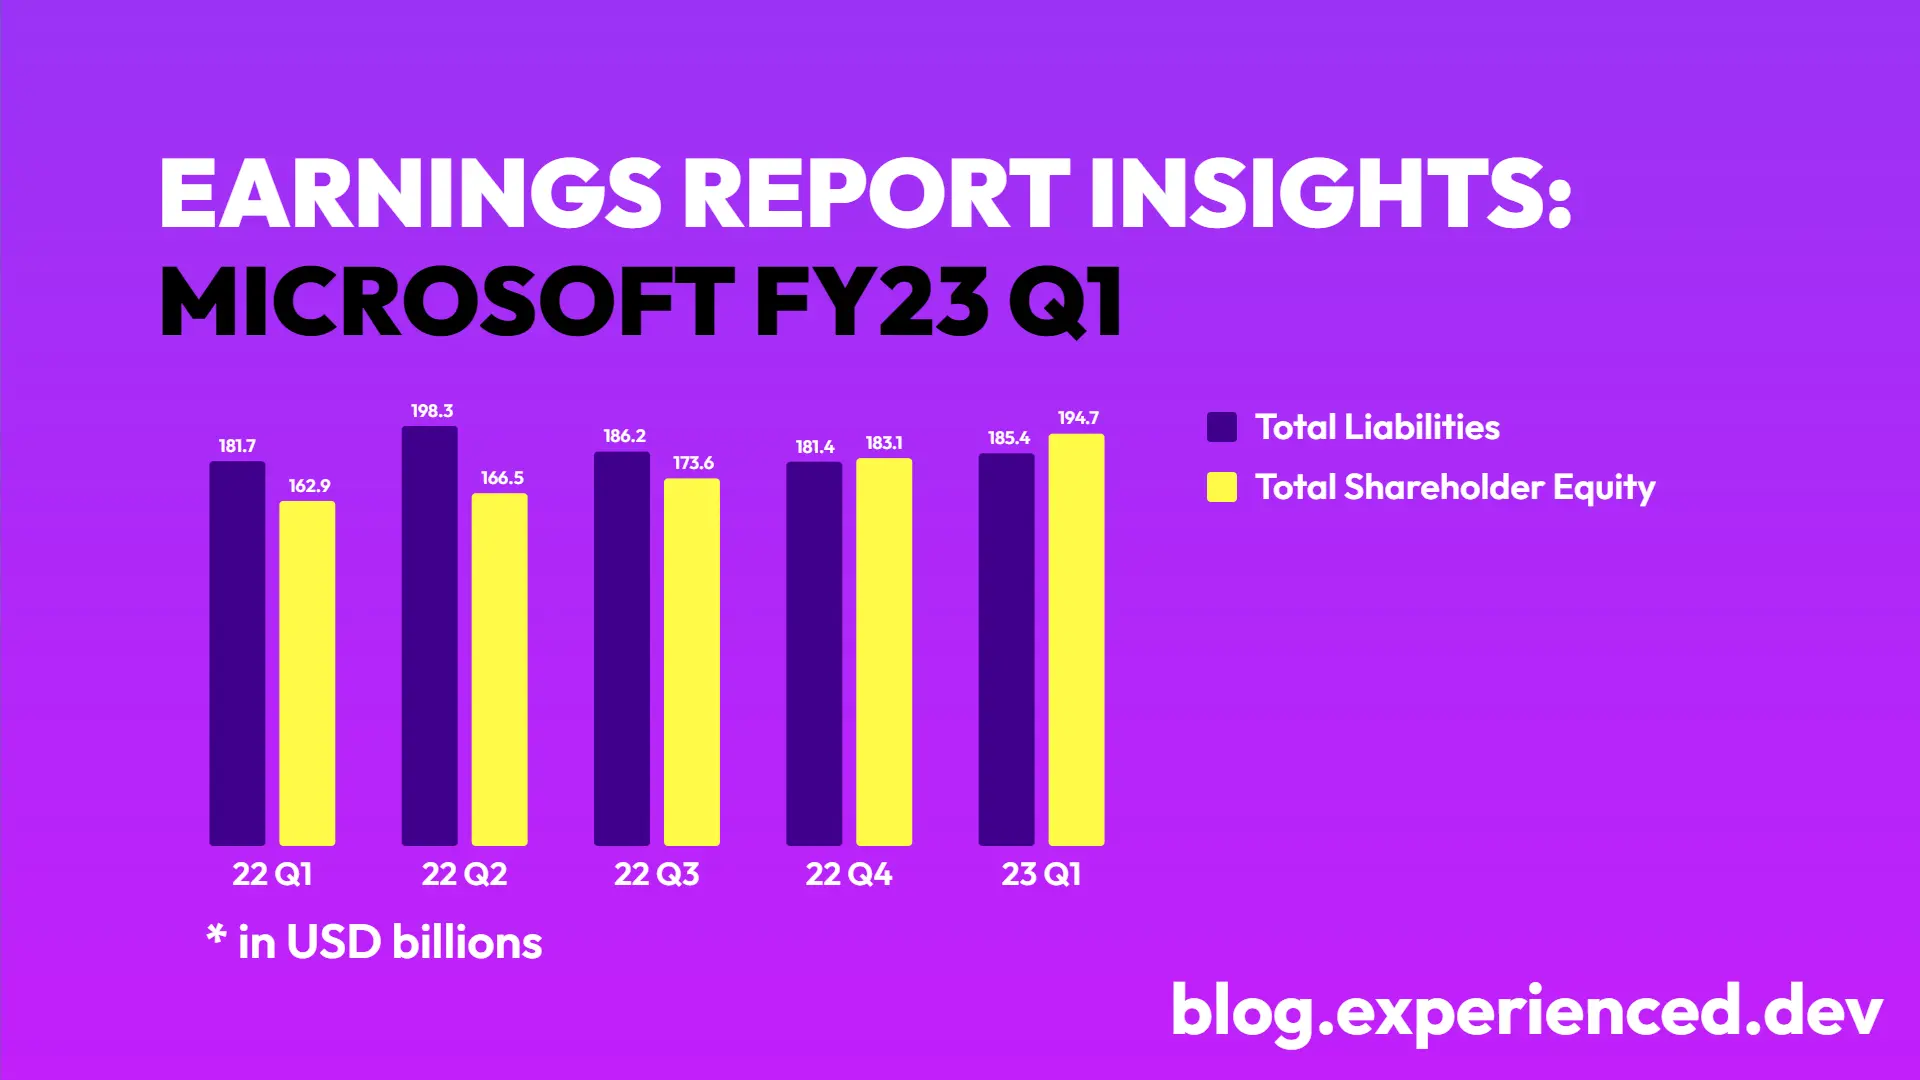 Microsoft FY23 Q1: Earnings Breakdown & AI Insights with Custom Questions using LangChain & OpenAI